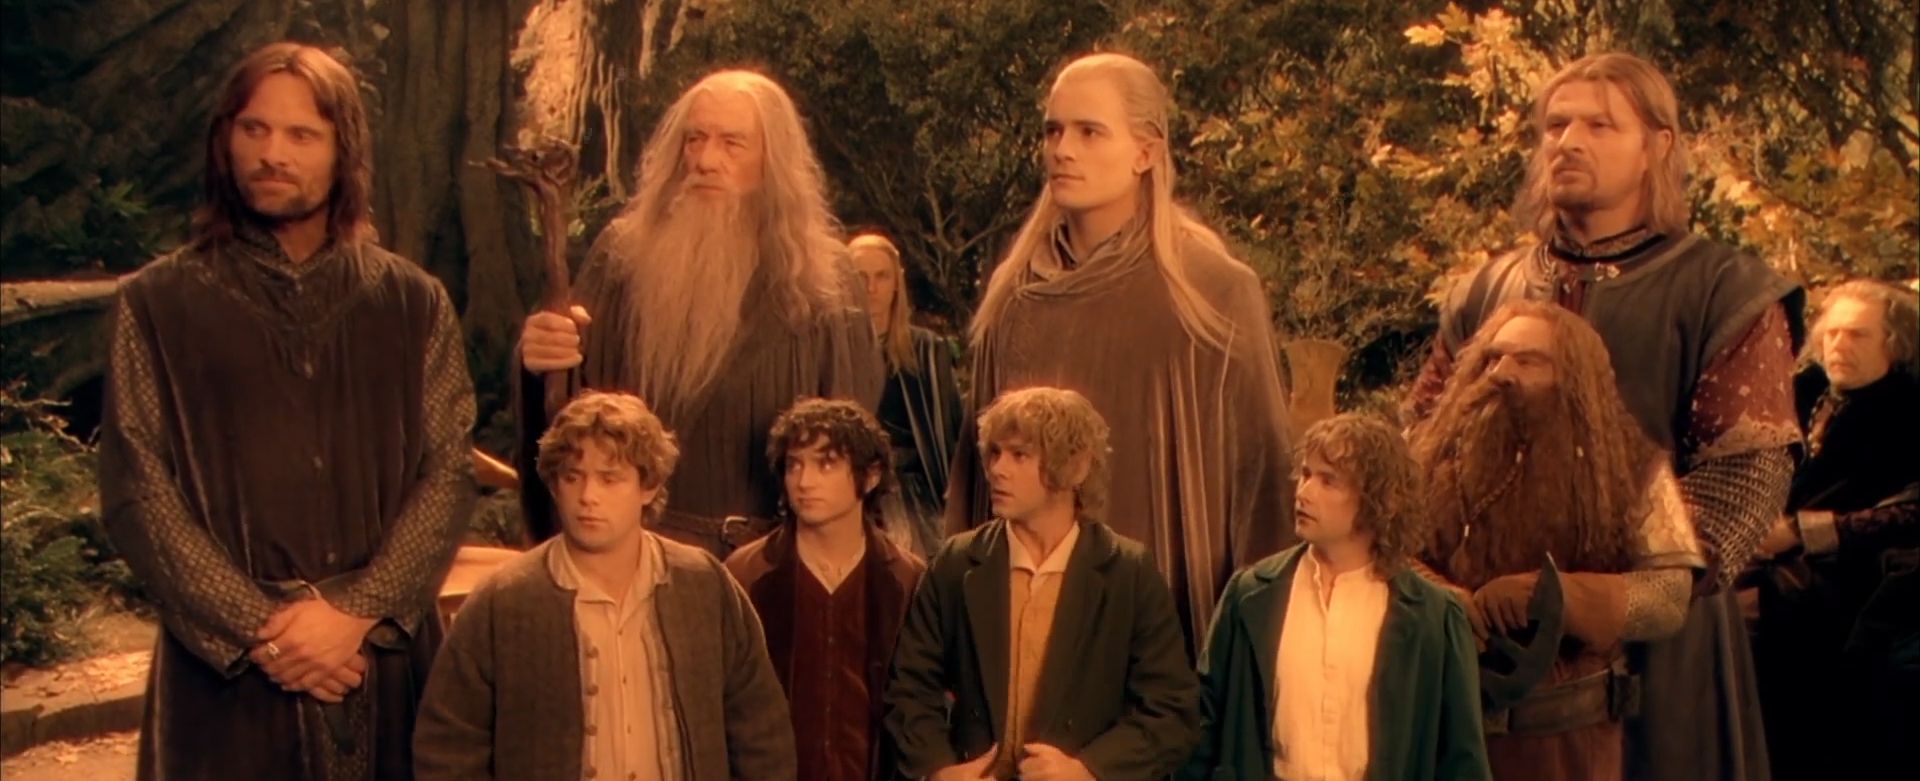 The Lord Of The Rings: The Rings of Power: Even Eagle-Eyed Fans